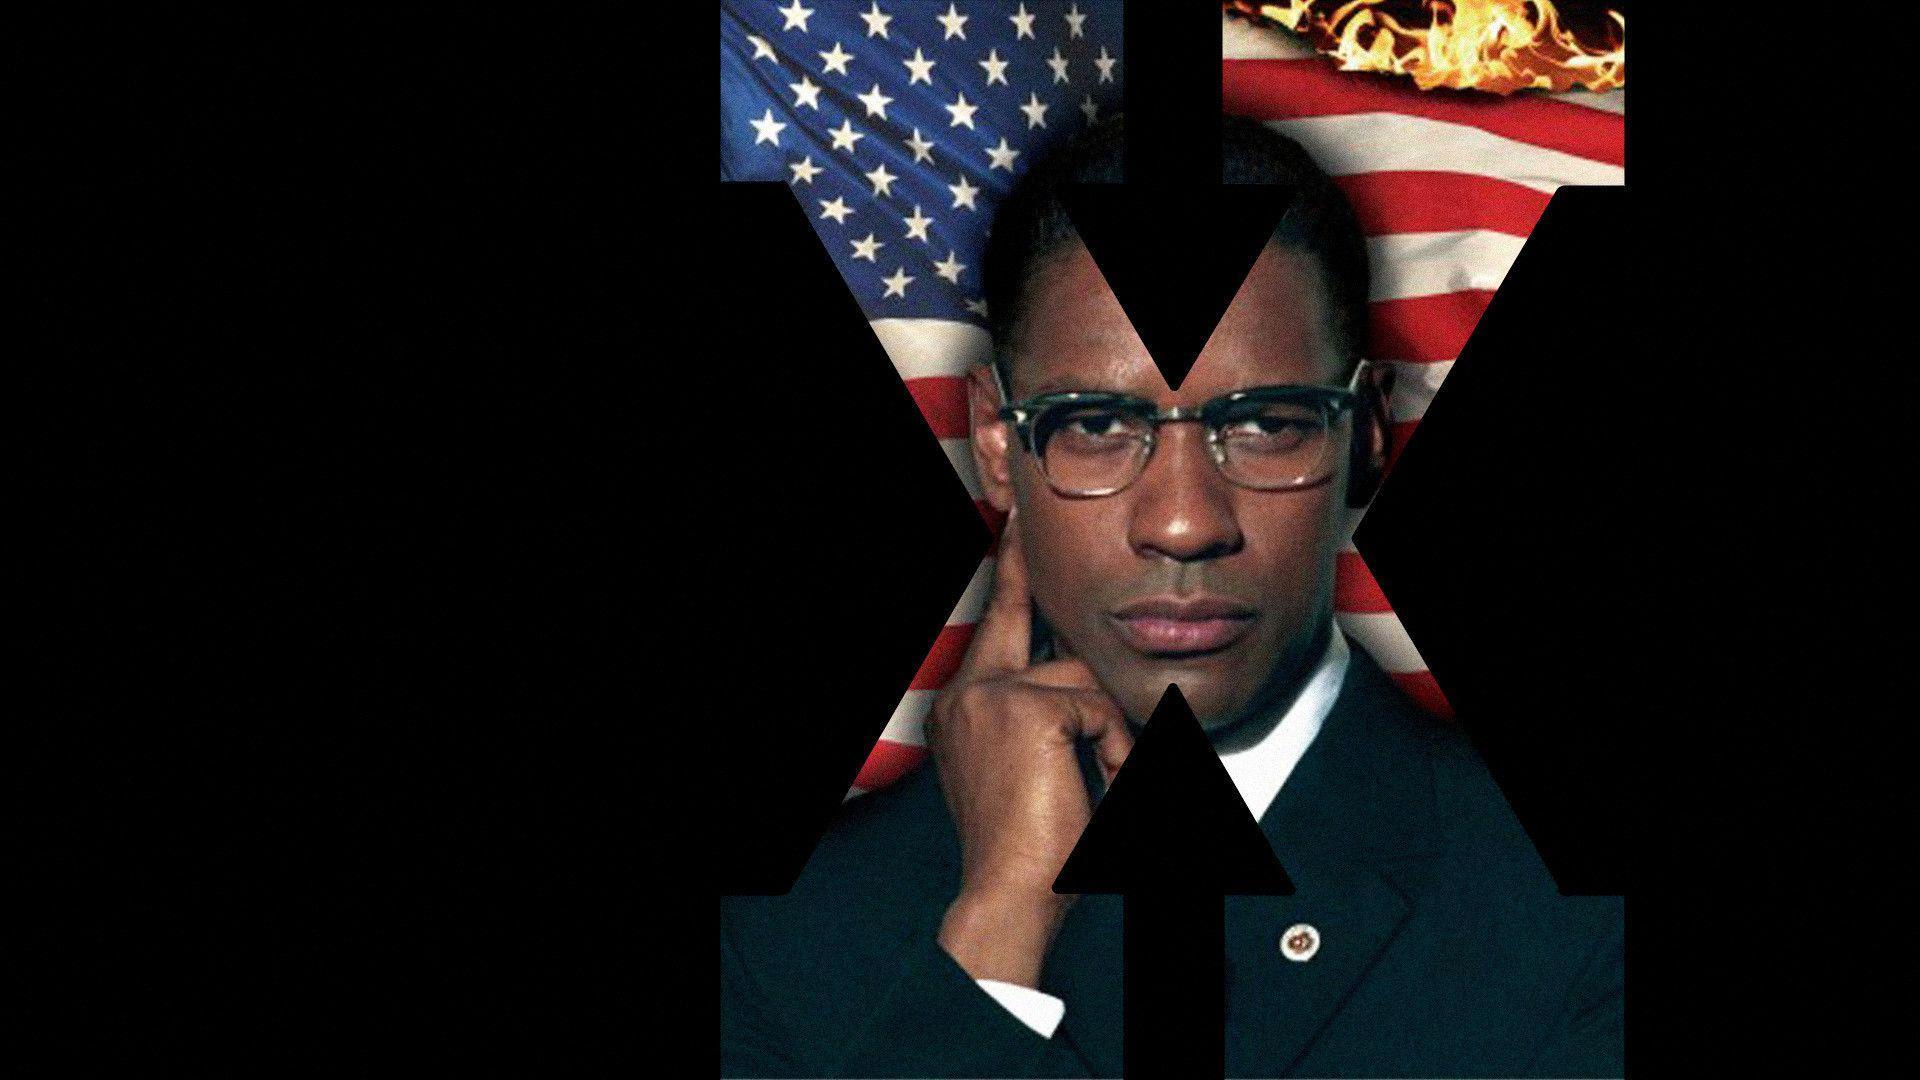 Malcolm X Wallpapers